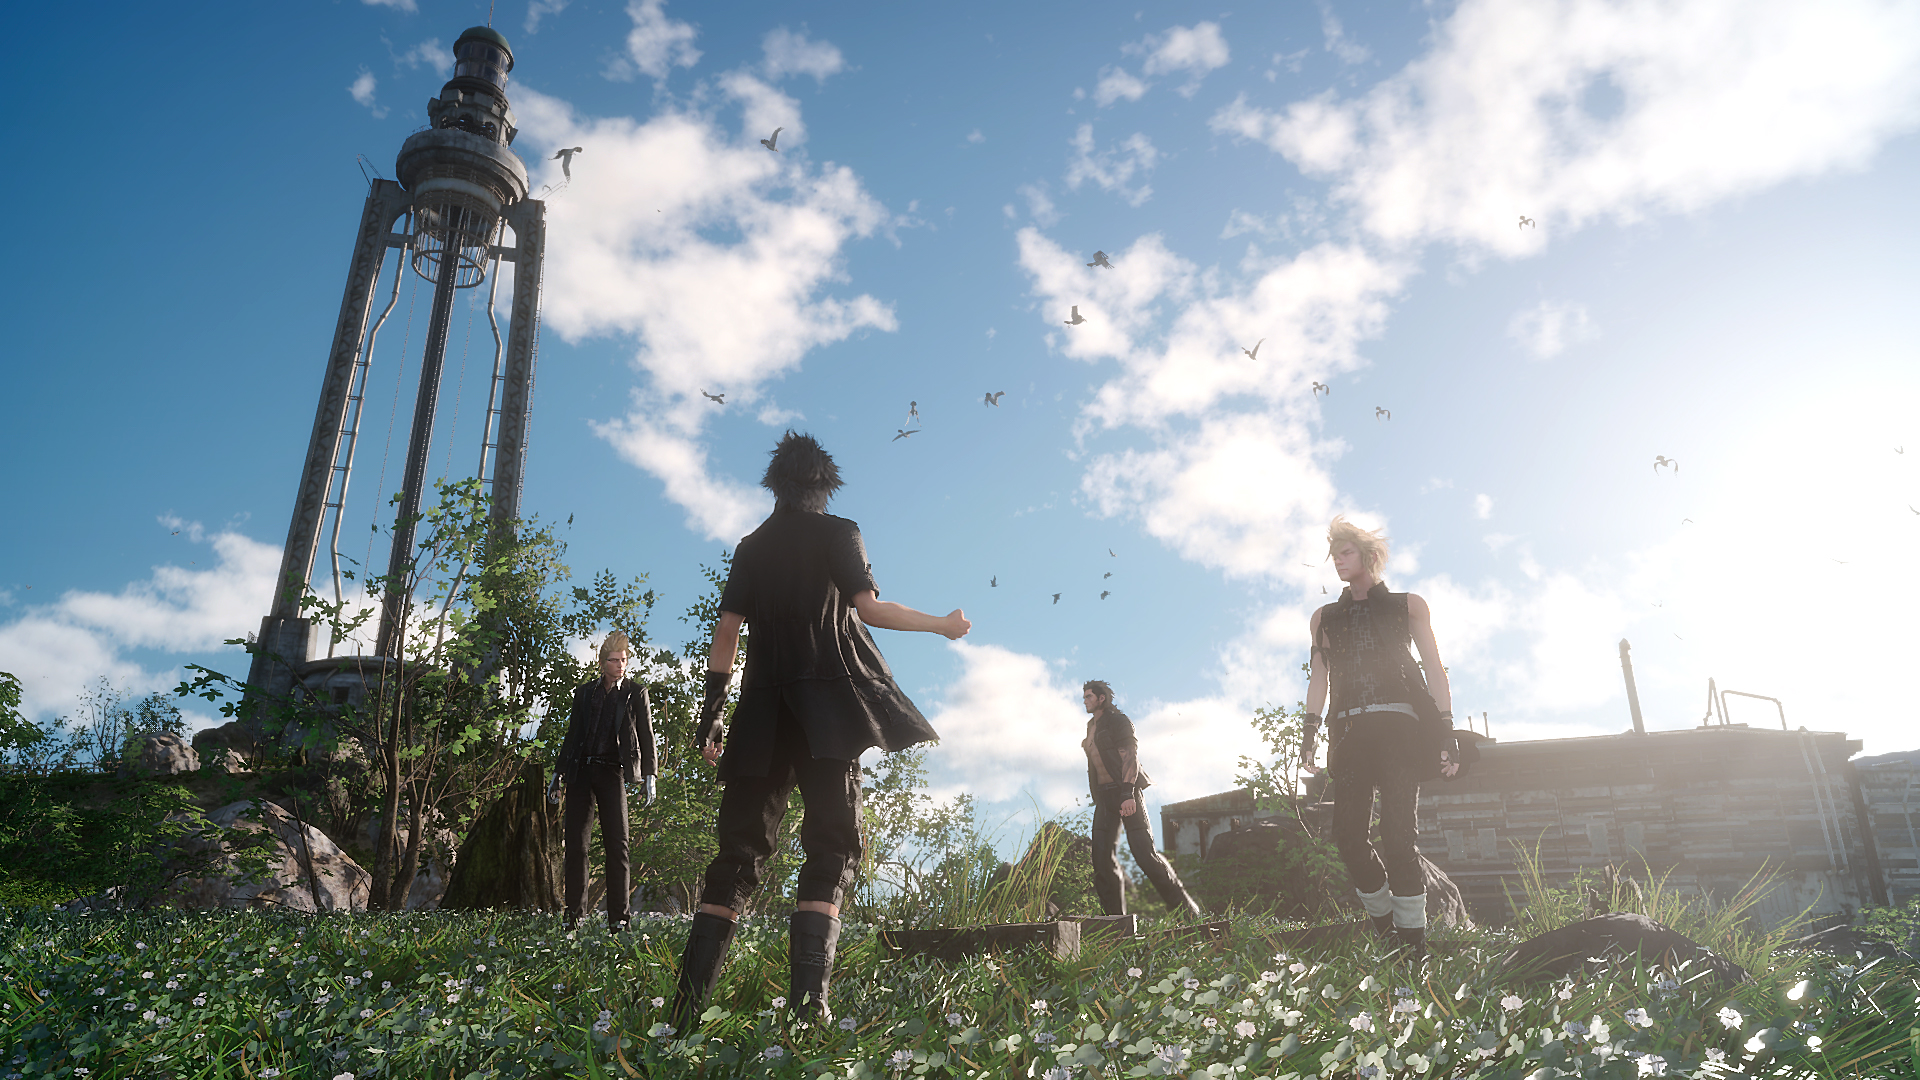 Final Fantasy 15 review: Humanity and warmth shine through even when the  story leaves you cold